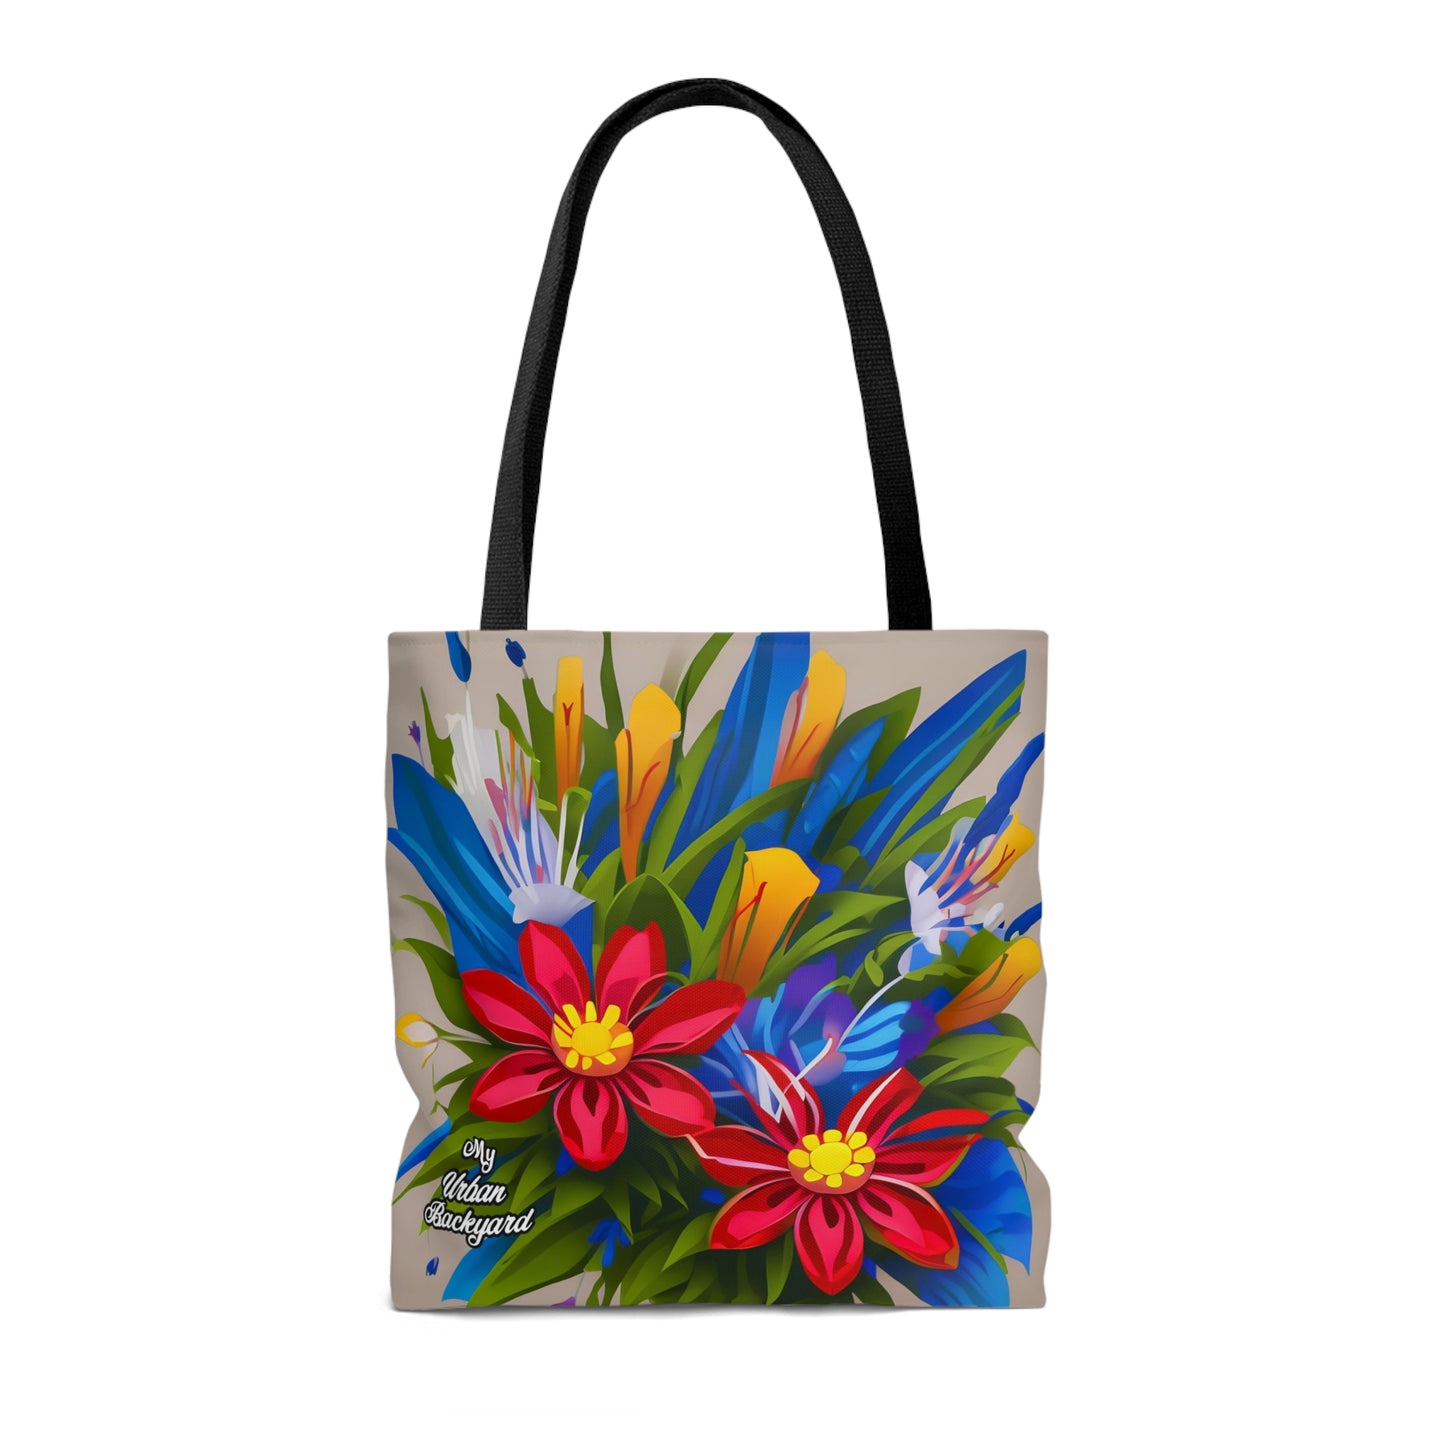 Vibrant Wildflowers, Tote Bag for Everyday Use - Durable and Functional